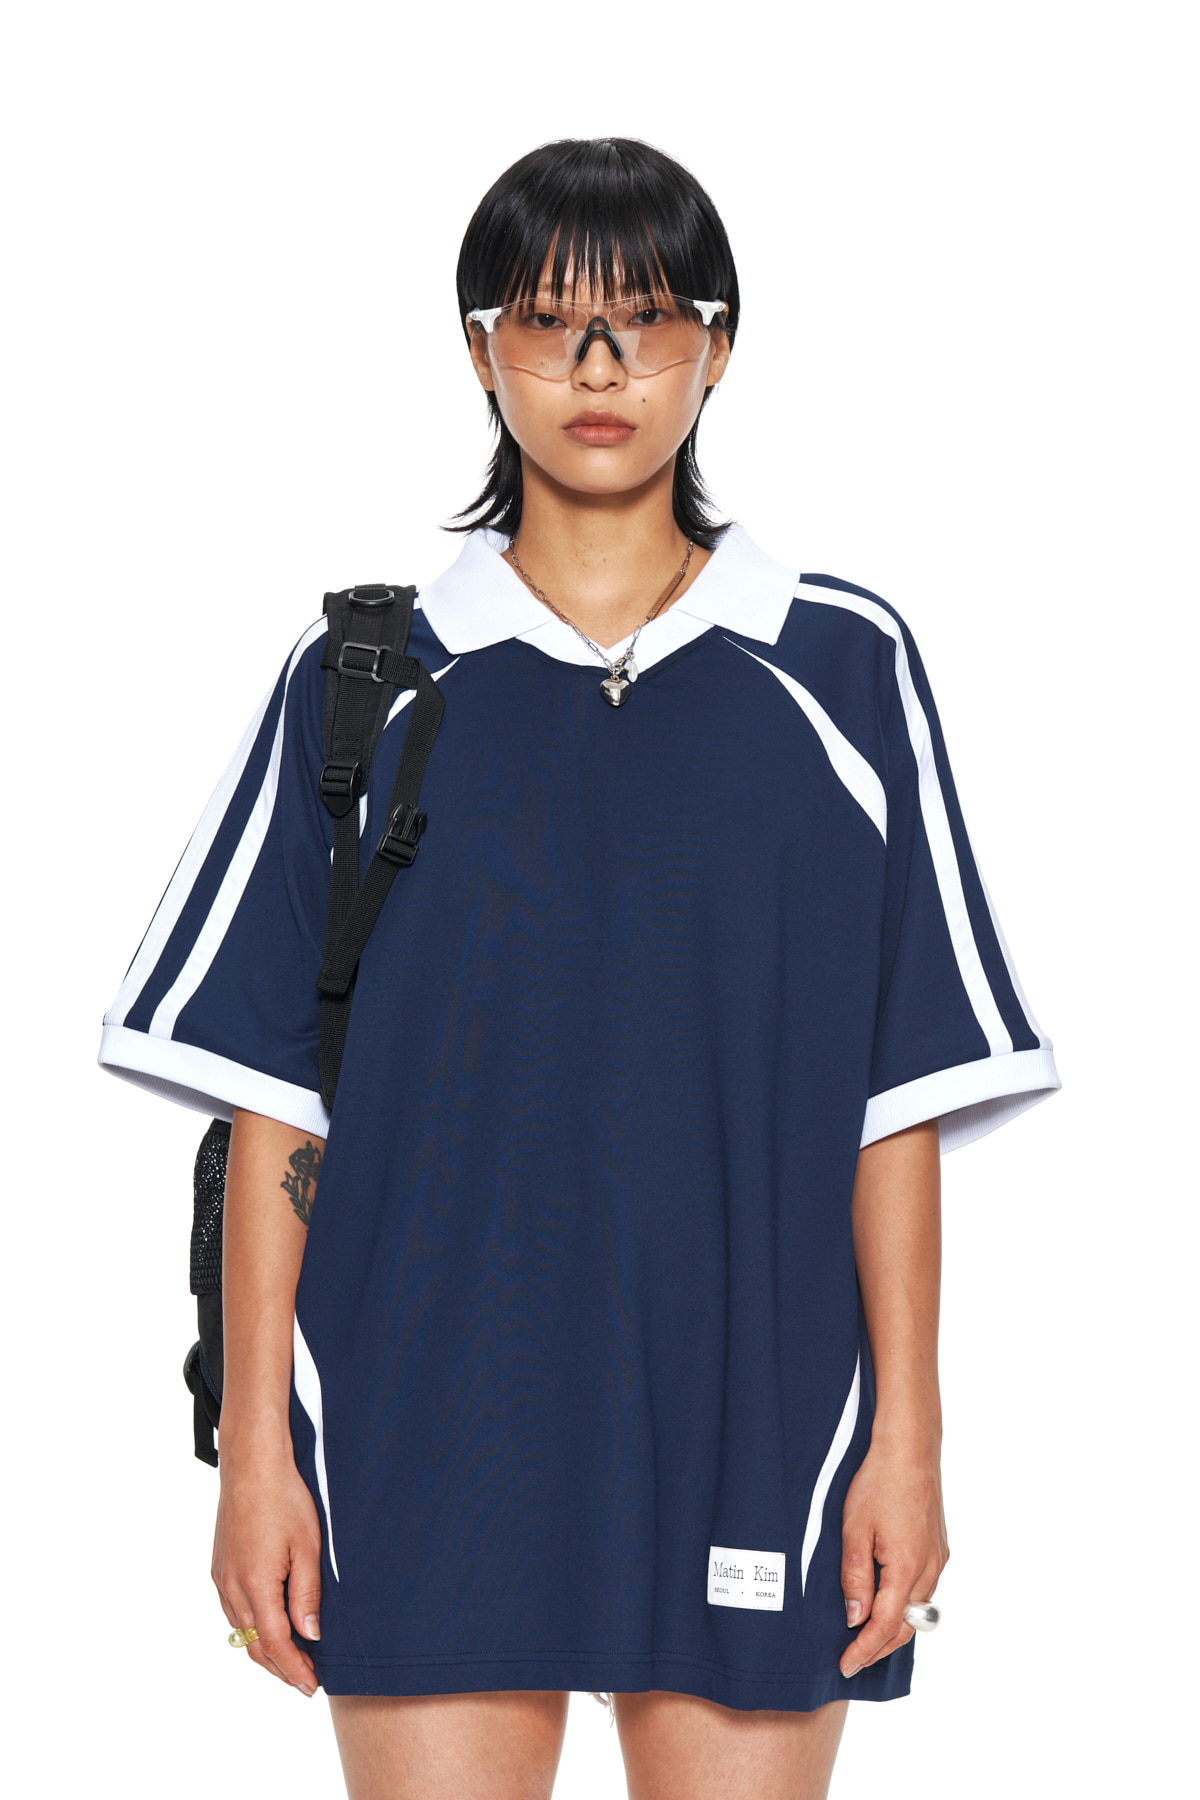 SPORTY TRACK JERSEY TOP IN NAVY - MATINKIM